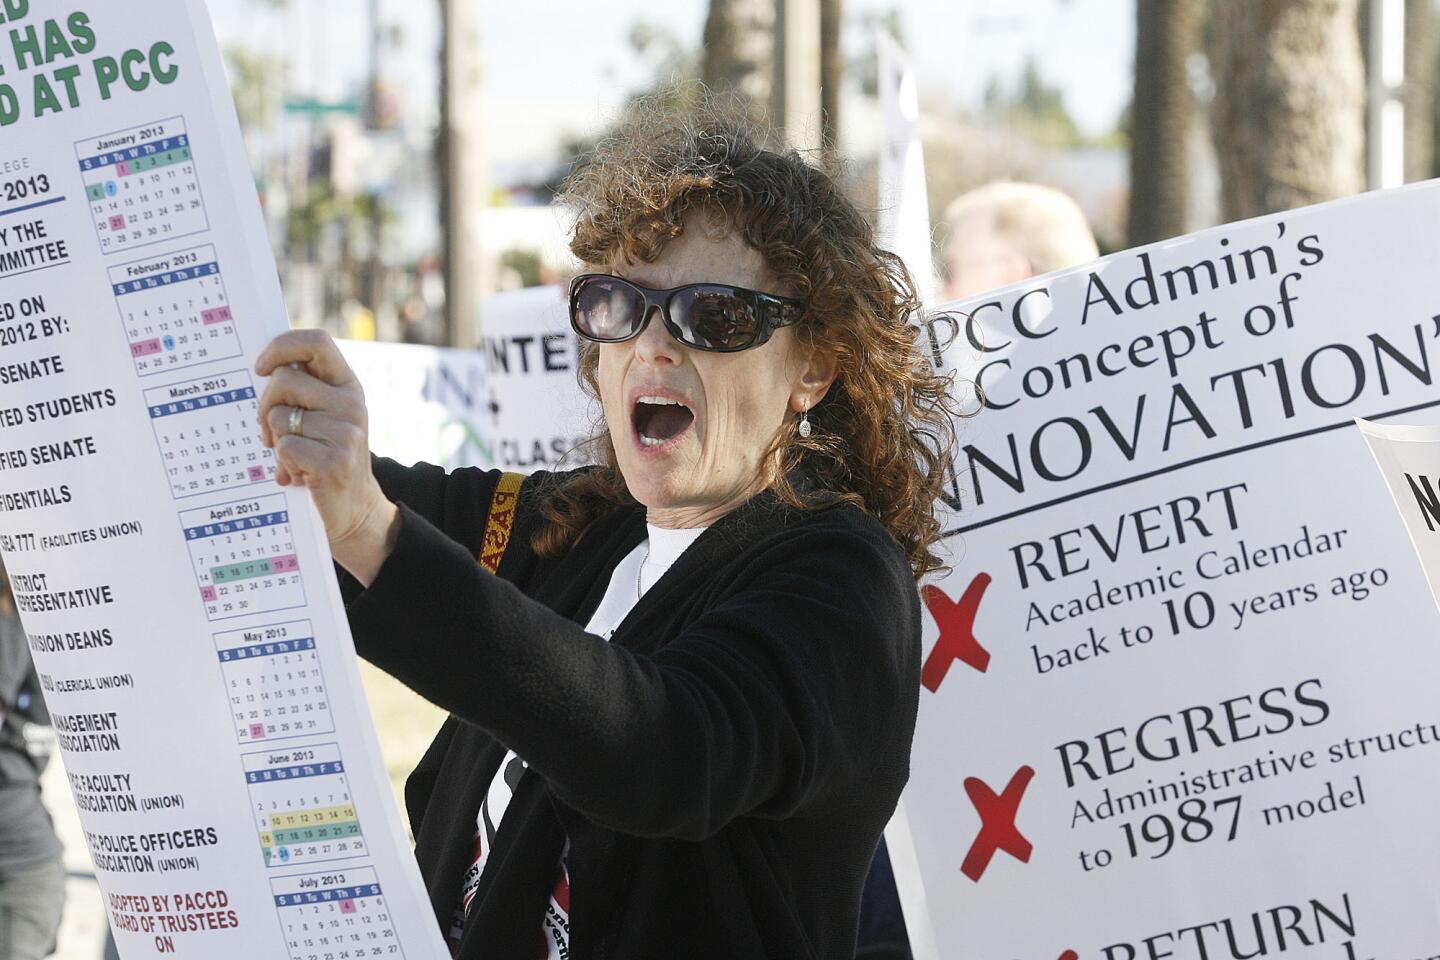 Photo Gallery: PCC student and faculty protest about class and budget cuts